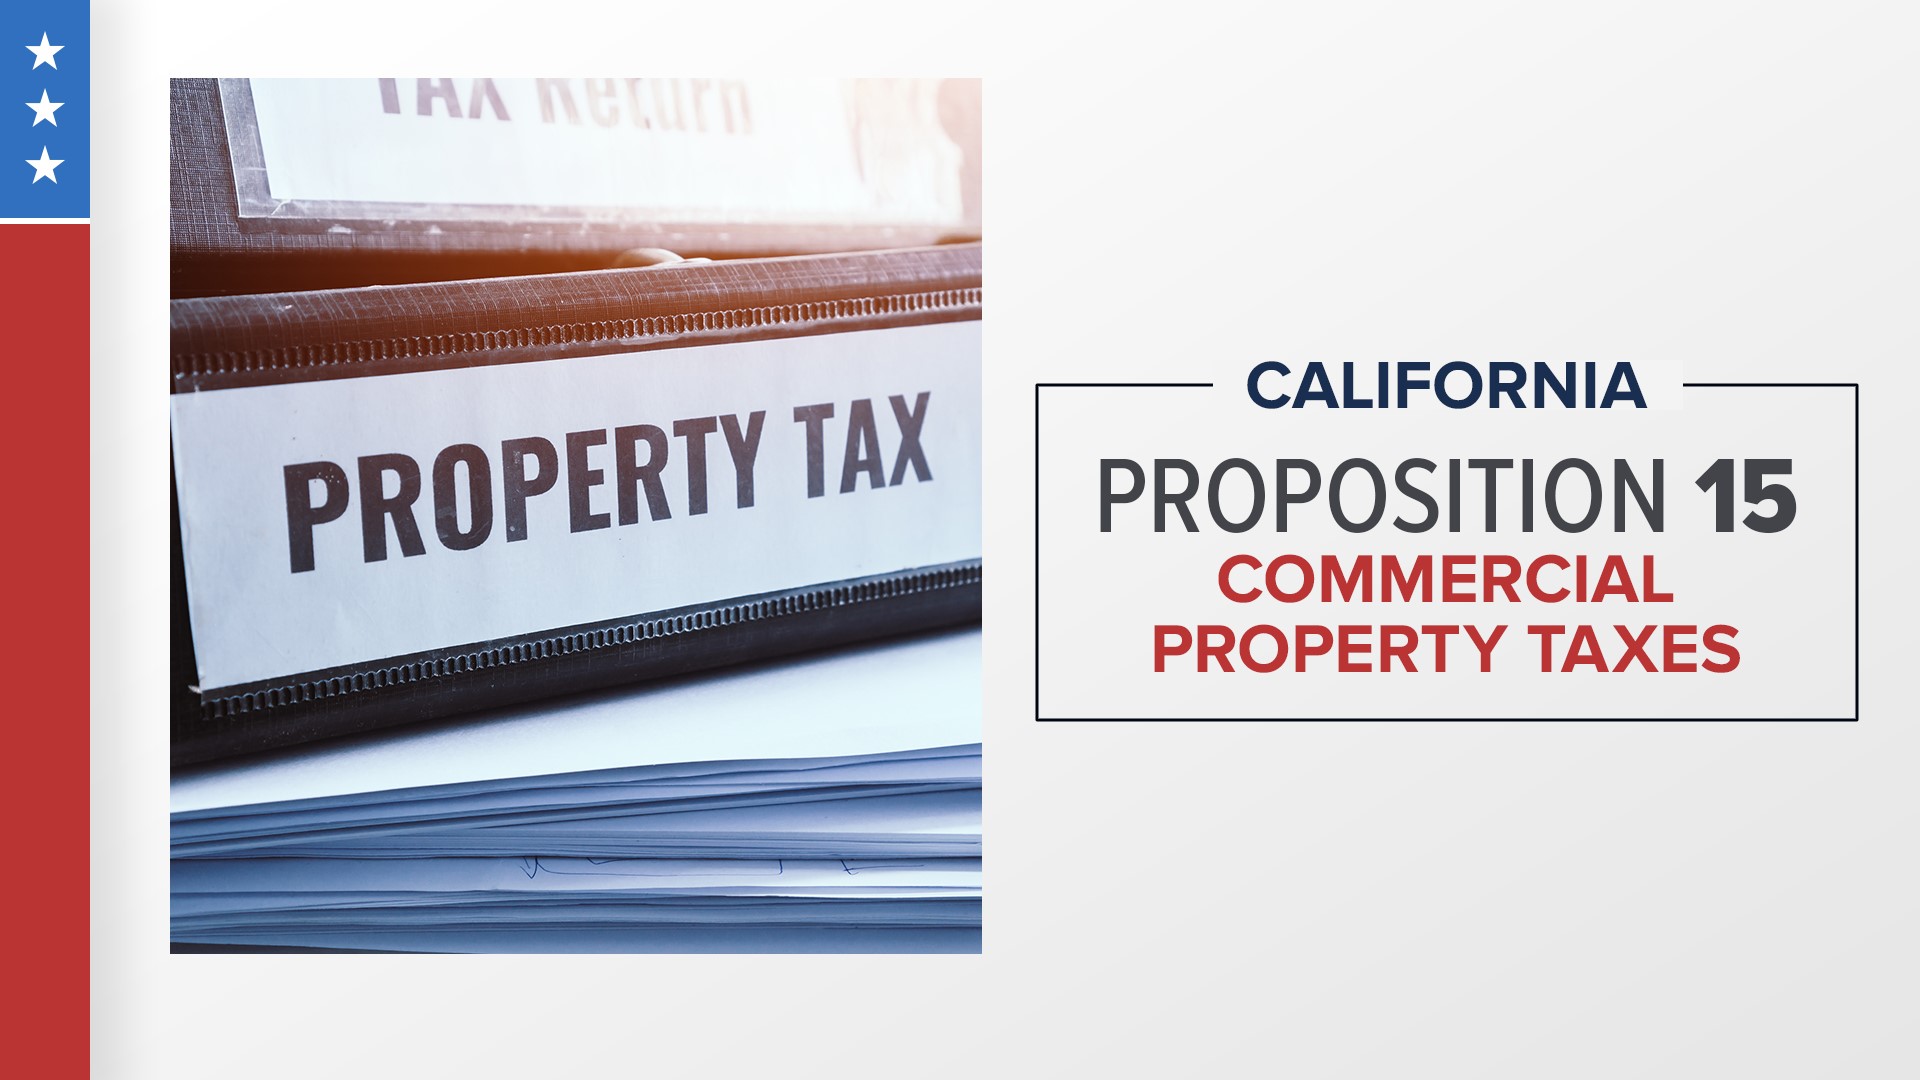 Proposition 15 is on the ballot to eliminate the property tax cap for business properties to increase funding for local governments and schools.